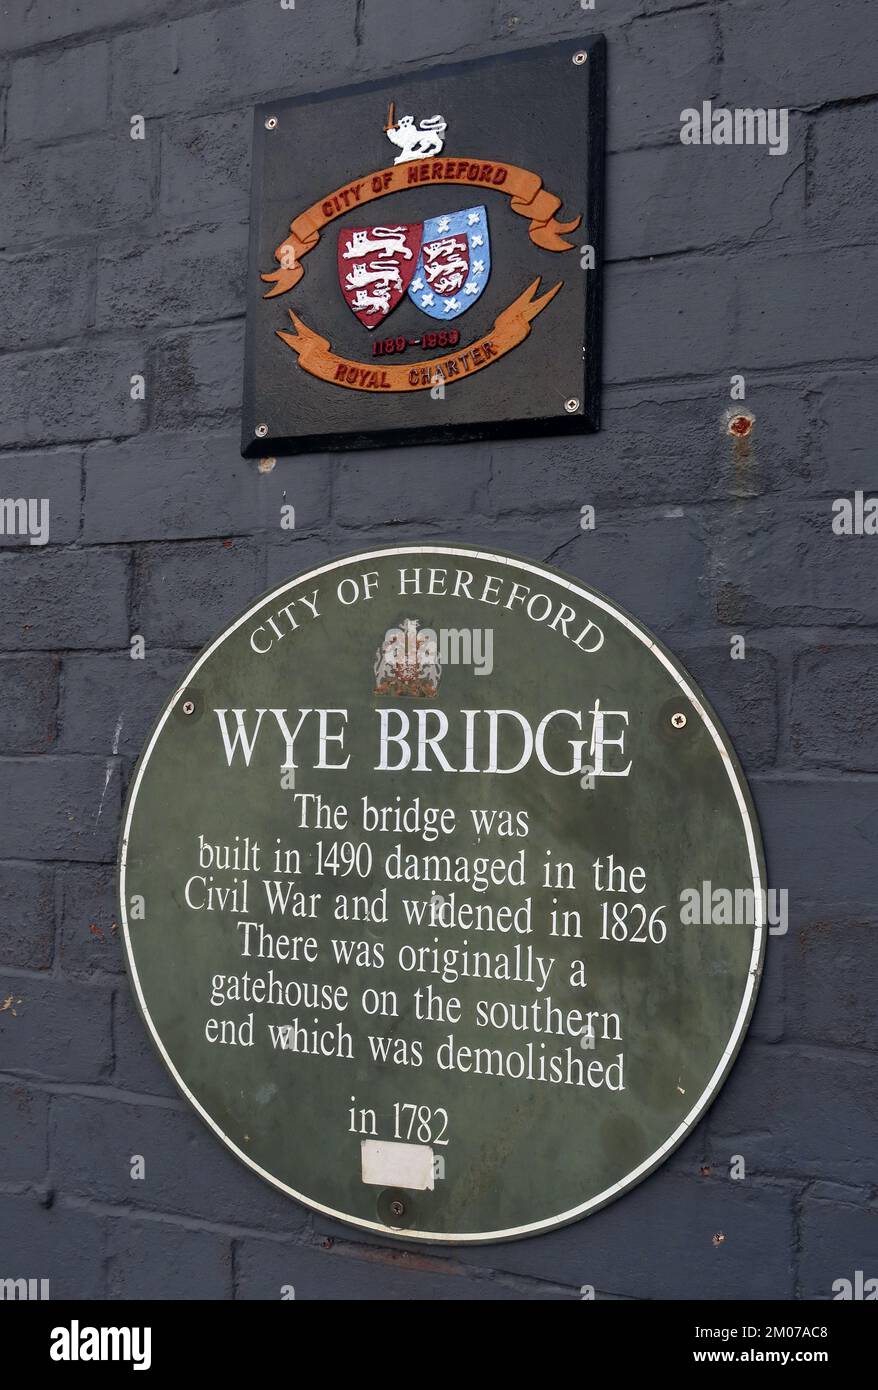 City of Hereford, Wye Bridge plaque, 1490, damaged in the civil war, Stock Photo